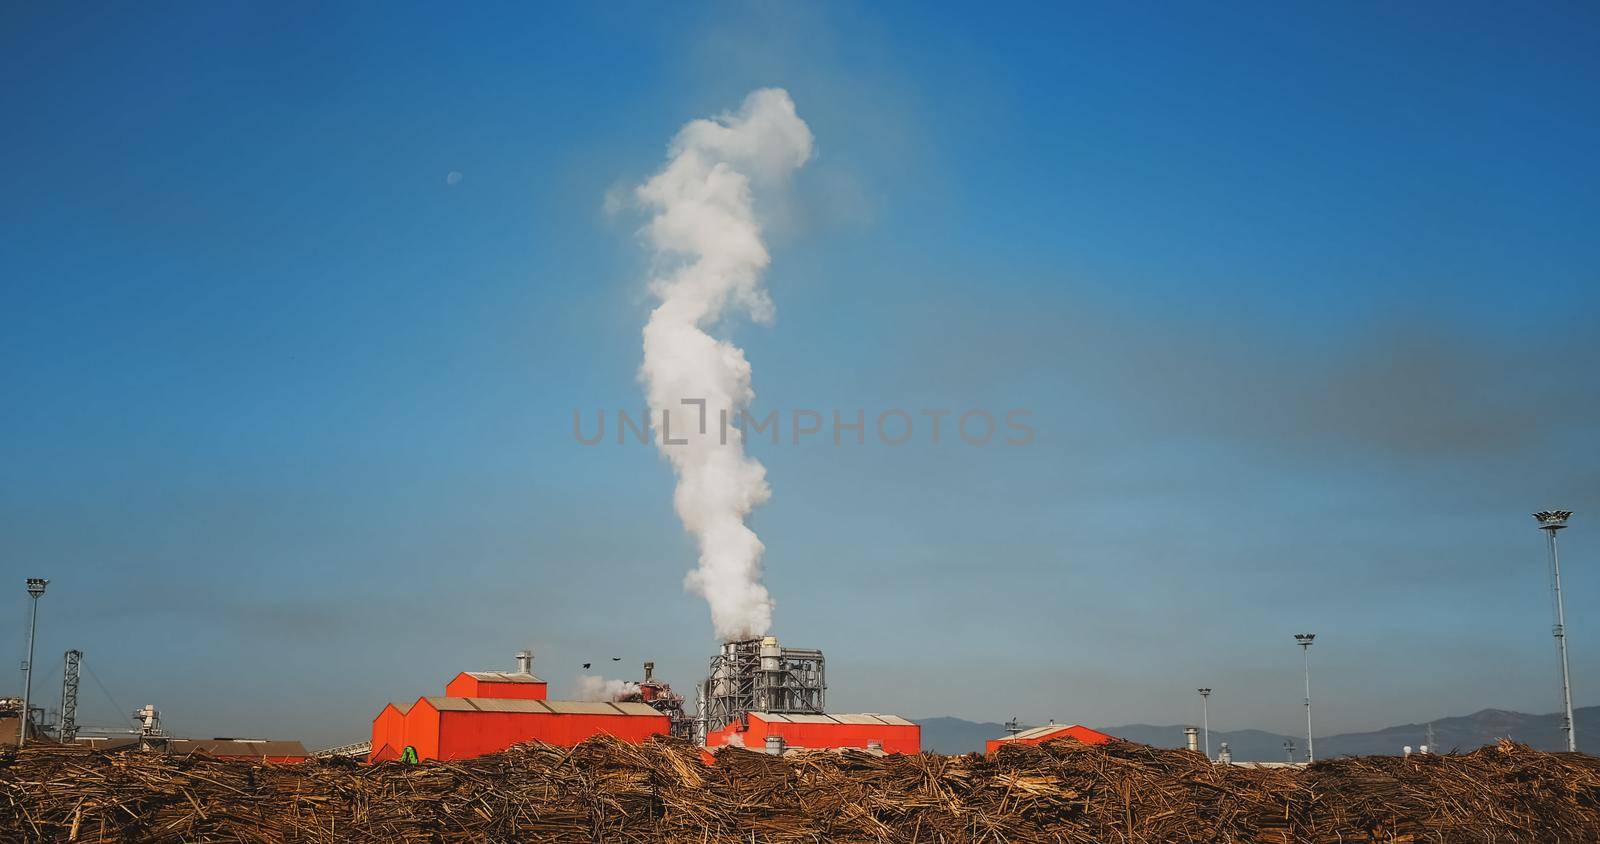 Wood Factory. SMOKE Pollute Industry Atmosphere With Smoke Ecology pollution, Industrial Factory Pollutes. Smoke on blue sky background. Air pollution of Furniture Factory.